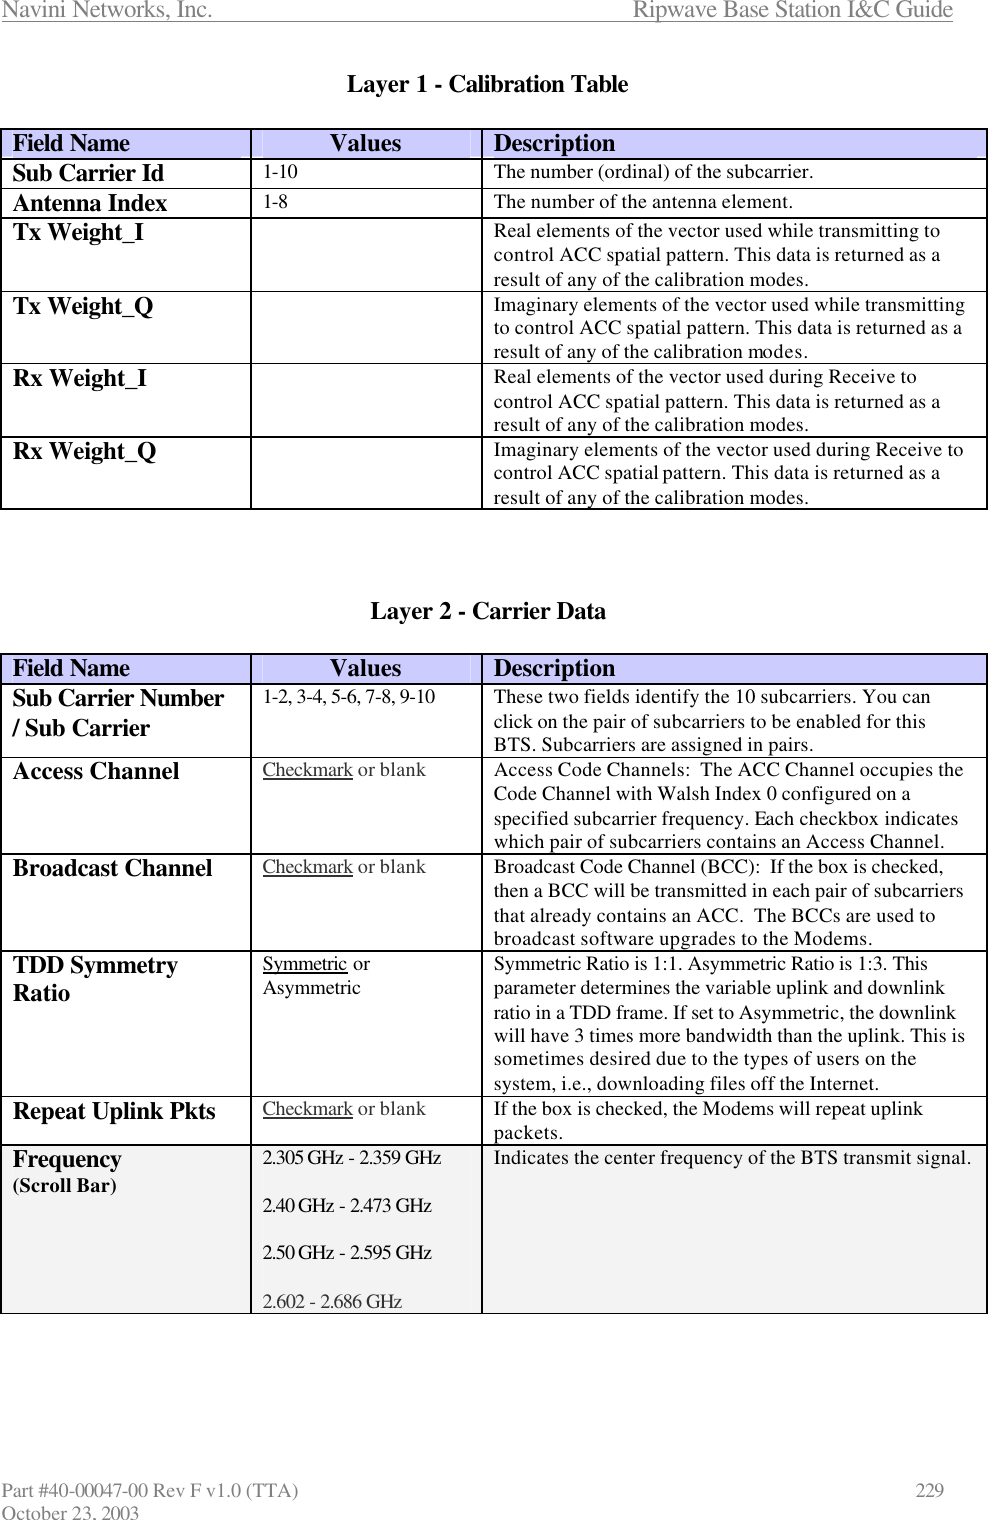 Navini Networks, Inc.                      Ripwave Base Station I&amp;C Guide Part #40-00047-00 Rev F v1.0 (TTA)            229 October 23, 2003 Layer 1 - Calibration Table  Field Name Values Description Sub Carrier Id 1-10 The number (ordinal) of the subcarrier. Antenna Index 1-8 The number of the antenna element. Tx Weight_I  Real elements of the vector used while transmitting to control ACC spatial pattern. This data is returned as a result of any of the calibration modes. Tx Weight_Q  Imaginary elements of the vector used while transmitting to control ACC spatial pattern. This data is returned as a result of any of the calibration modes. Rx Weight_I  Real elements of the vector used during Receive to control ACC spatial pattern. This data is returned as a result of any of the calibration modes. Rx Weight_Q  Imaginary elements of the vector used during Receive to control ACC spatial pattern. This data is returned as a result of any of the calibration modes.    Layer 2 - Carrier Data  Field Name Values Description Sub Carrier Number / Sub Carrier 1-2, 3-4, 5-6, 7-8, 9-10 These two fields identify the 10 subcarriers. You can click on the pair of subcarriers to be enabled for this BTS. Subcarriers are assigned in pairs. Access Channel Checkmark or blank Access Code Channels:  The ACC Channel occupies the Code Channel with Walsh Index 0 configured on a specified subcarrier frequency. Each checkbox indicates which pair of subcarriers contains an Access Channel. Broadcast Channel Checkmark or blank Broadcast Code Channel (BCC):  If the box is checked, then a BCC will be transmitted in each pair of subcarriers that already contains an ACC.  The BCCs are used to broadcast software upgrades to the Modems. TDD Symmetry Ratio Symmetric or Asymmetric Symmetric Ratio is 1:1. Asymmetric Ratio is 1:3. This parameter determines the variable uplink and downlink ratio in a TDD frame. If set to Asymmetric, the downlink will have 3 times more bandwidth than the uplink. This is sometimes desired due to the types of users on the system, i.e., downloading files off the Internet. Repeat Uplink Pkts Checkmark or blank If the box is checked, the Modems will repeat uplink packets. Frequency (Scroll Bar) 2.305 GHz - 2.359 GHz  2.40 GHz - 2.473 GHz  2.50 GHz - 2.595 GHz  2.602 - 2.686 GHz Indicates the center frequency of the BTS transmit signal.   